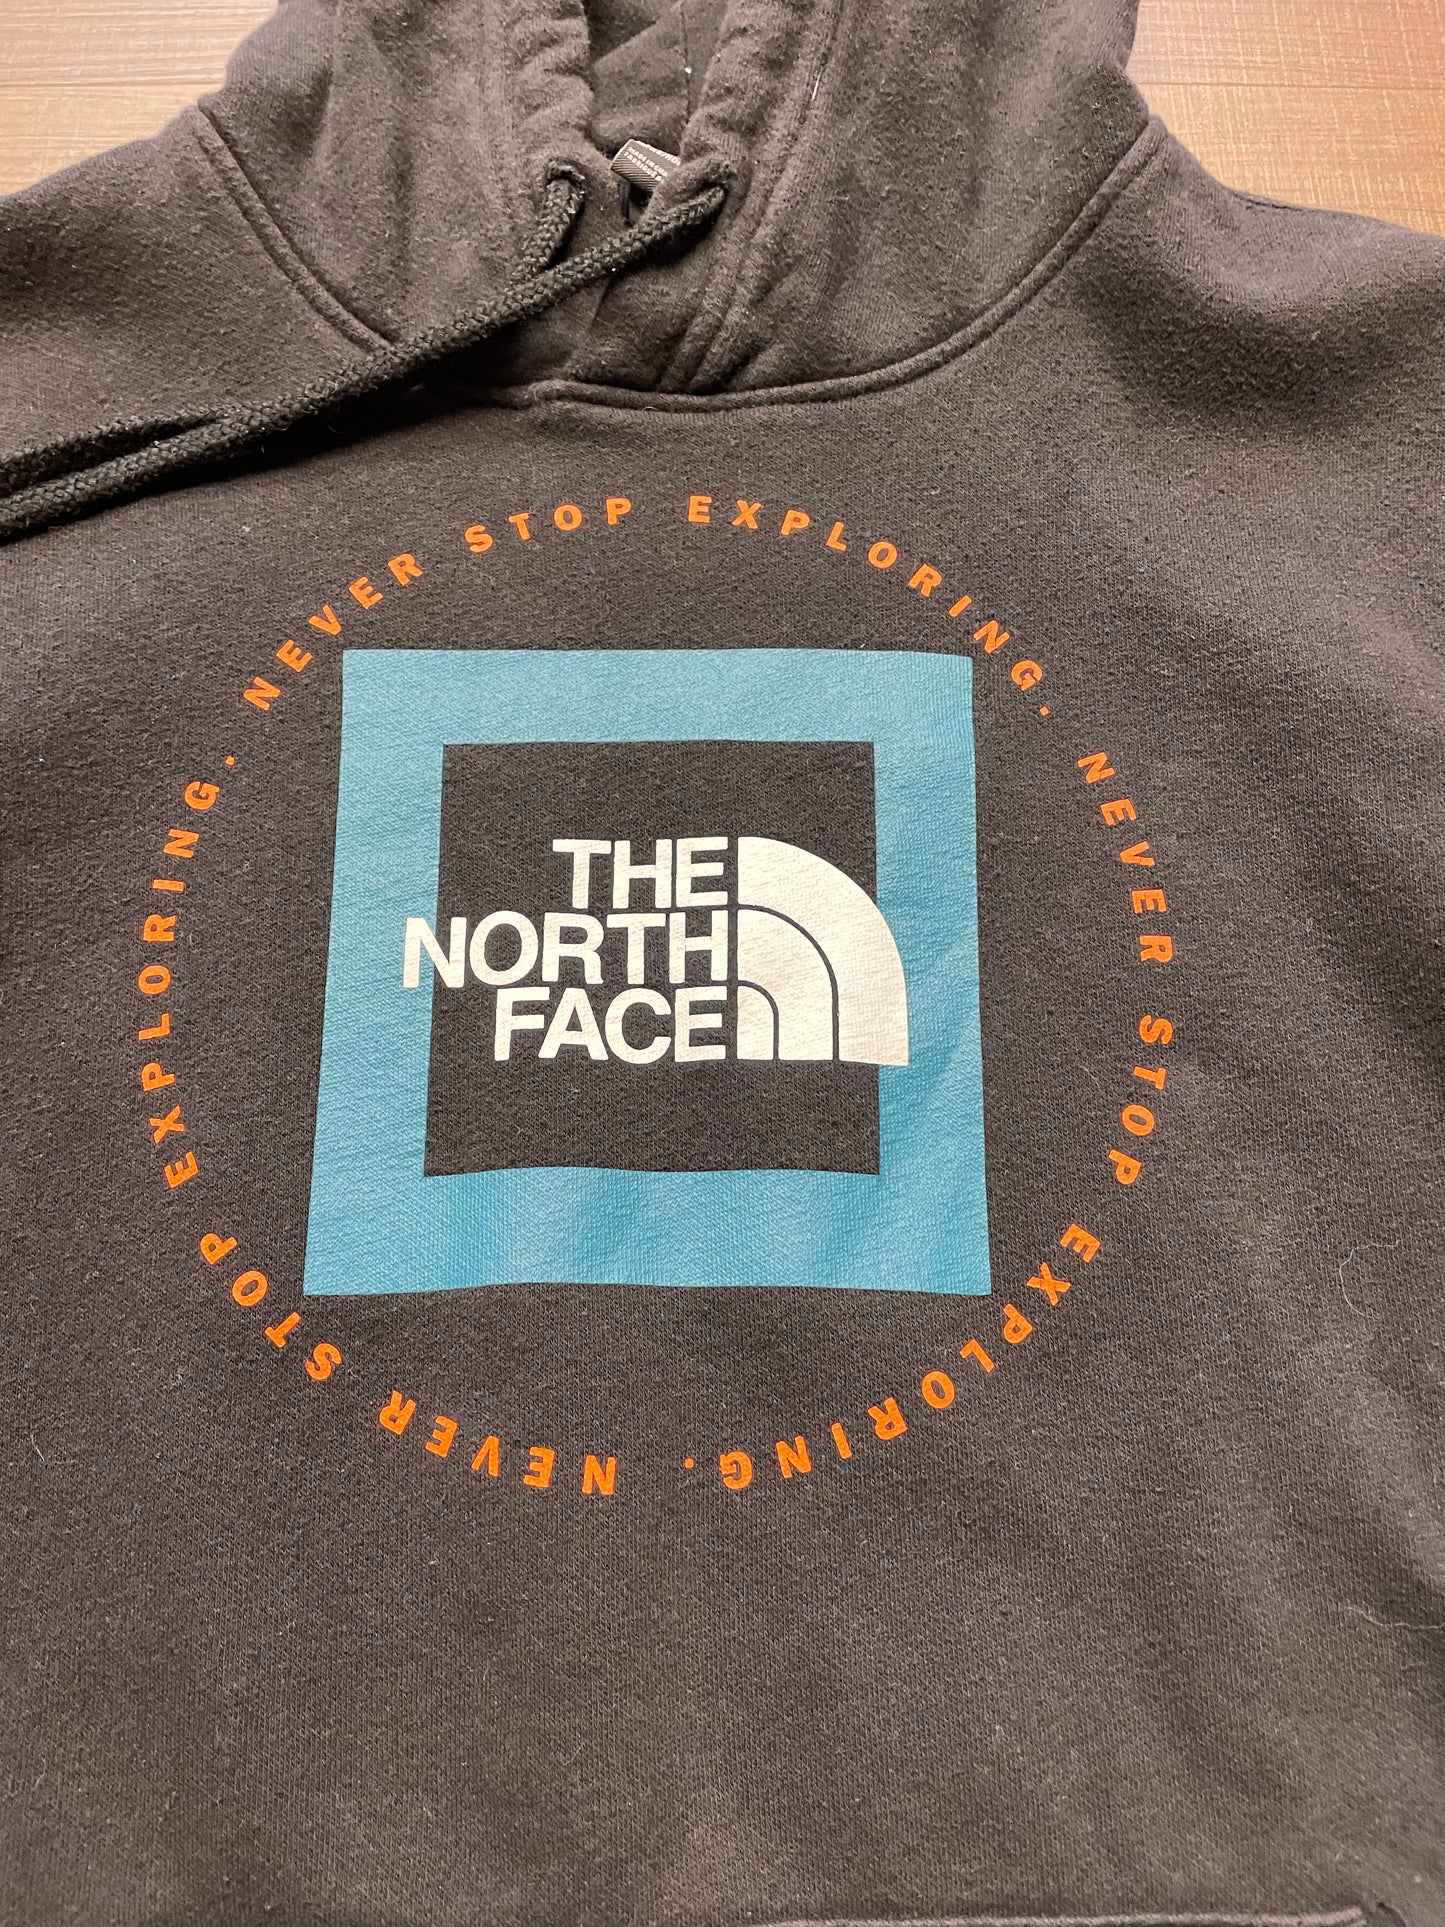 The North Face Men's Hoodie (M)